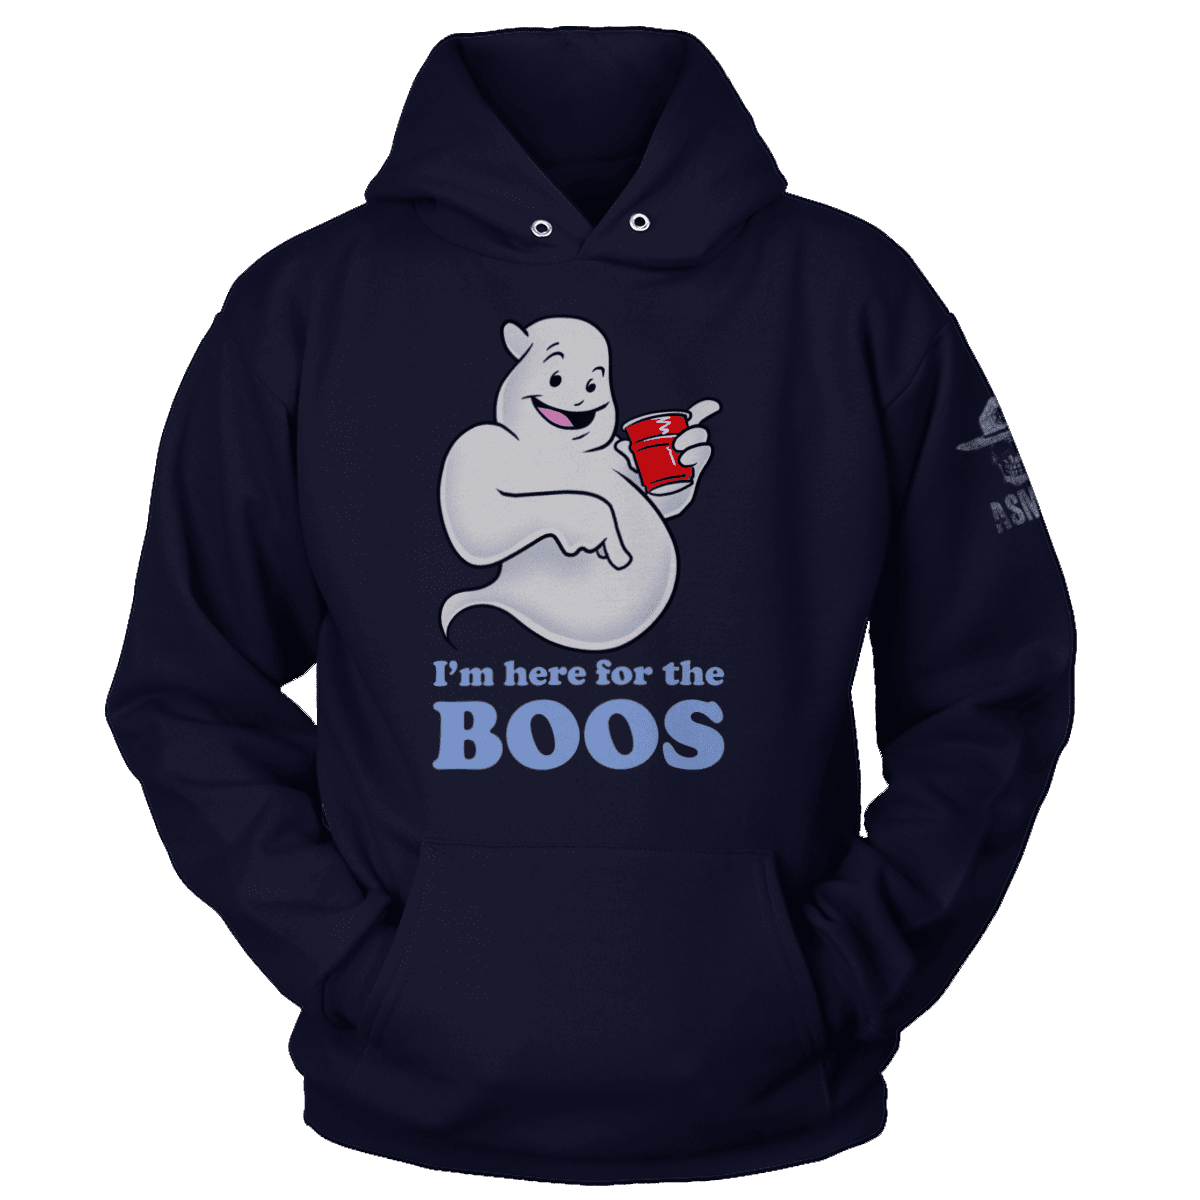 Here for the Boos!